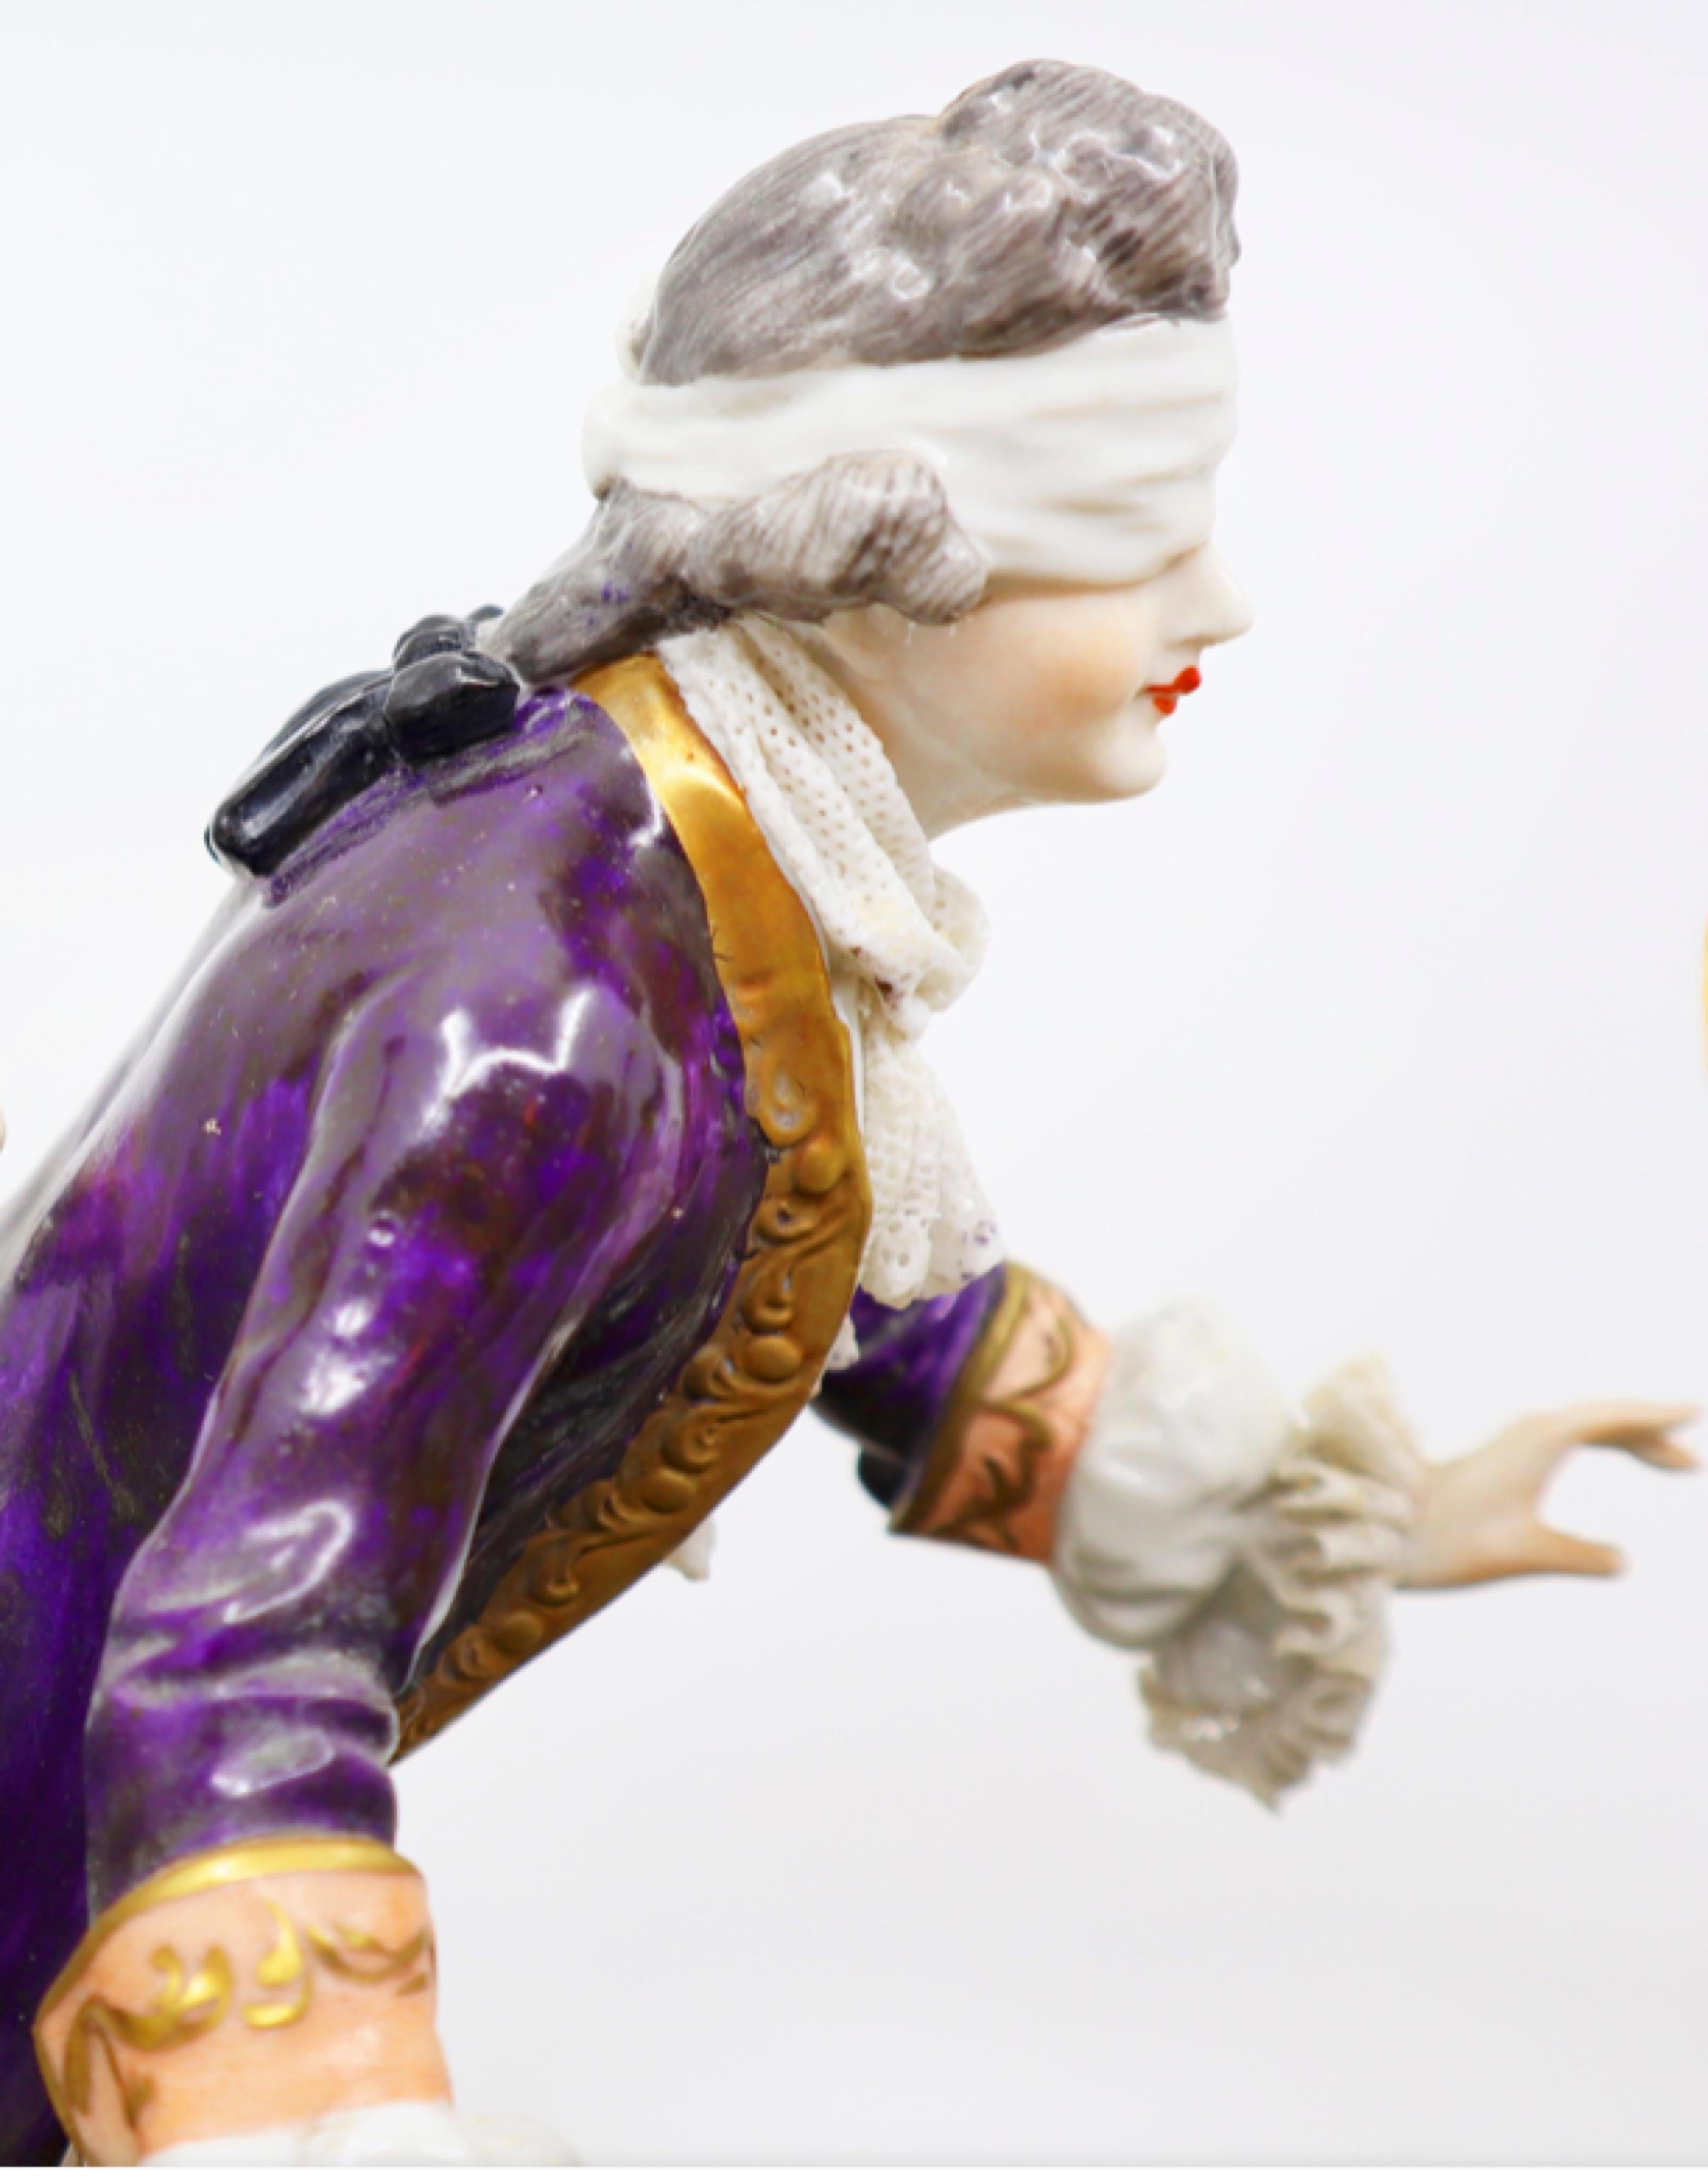 Porcelain Figure Group Playing the Blind Man's Buff 19th Century, French In Good Condition For Sale In Lantau, HK